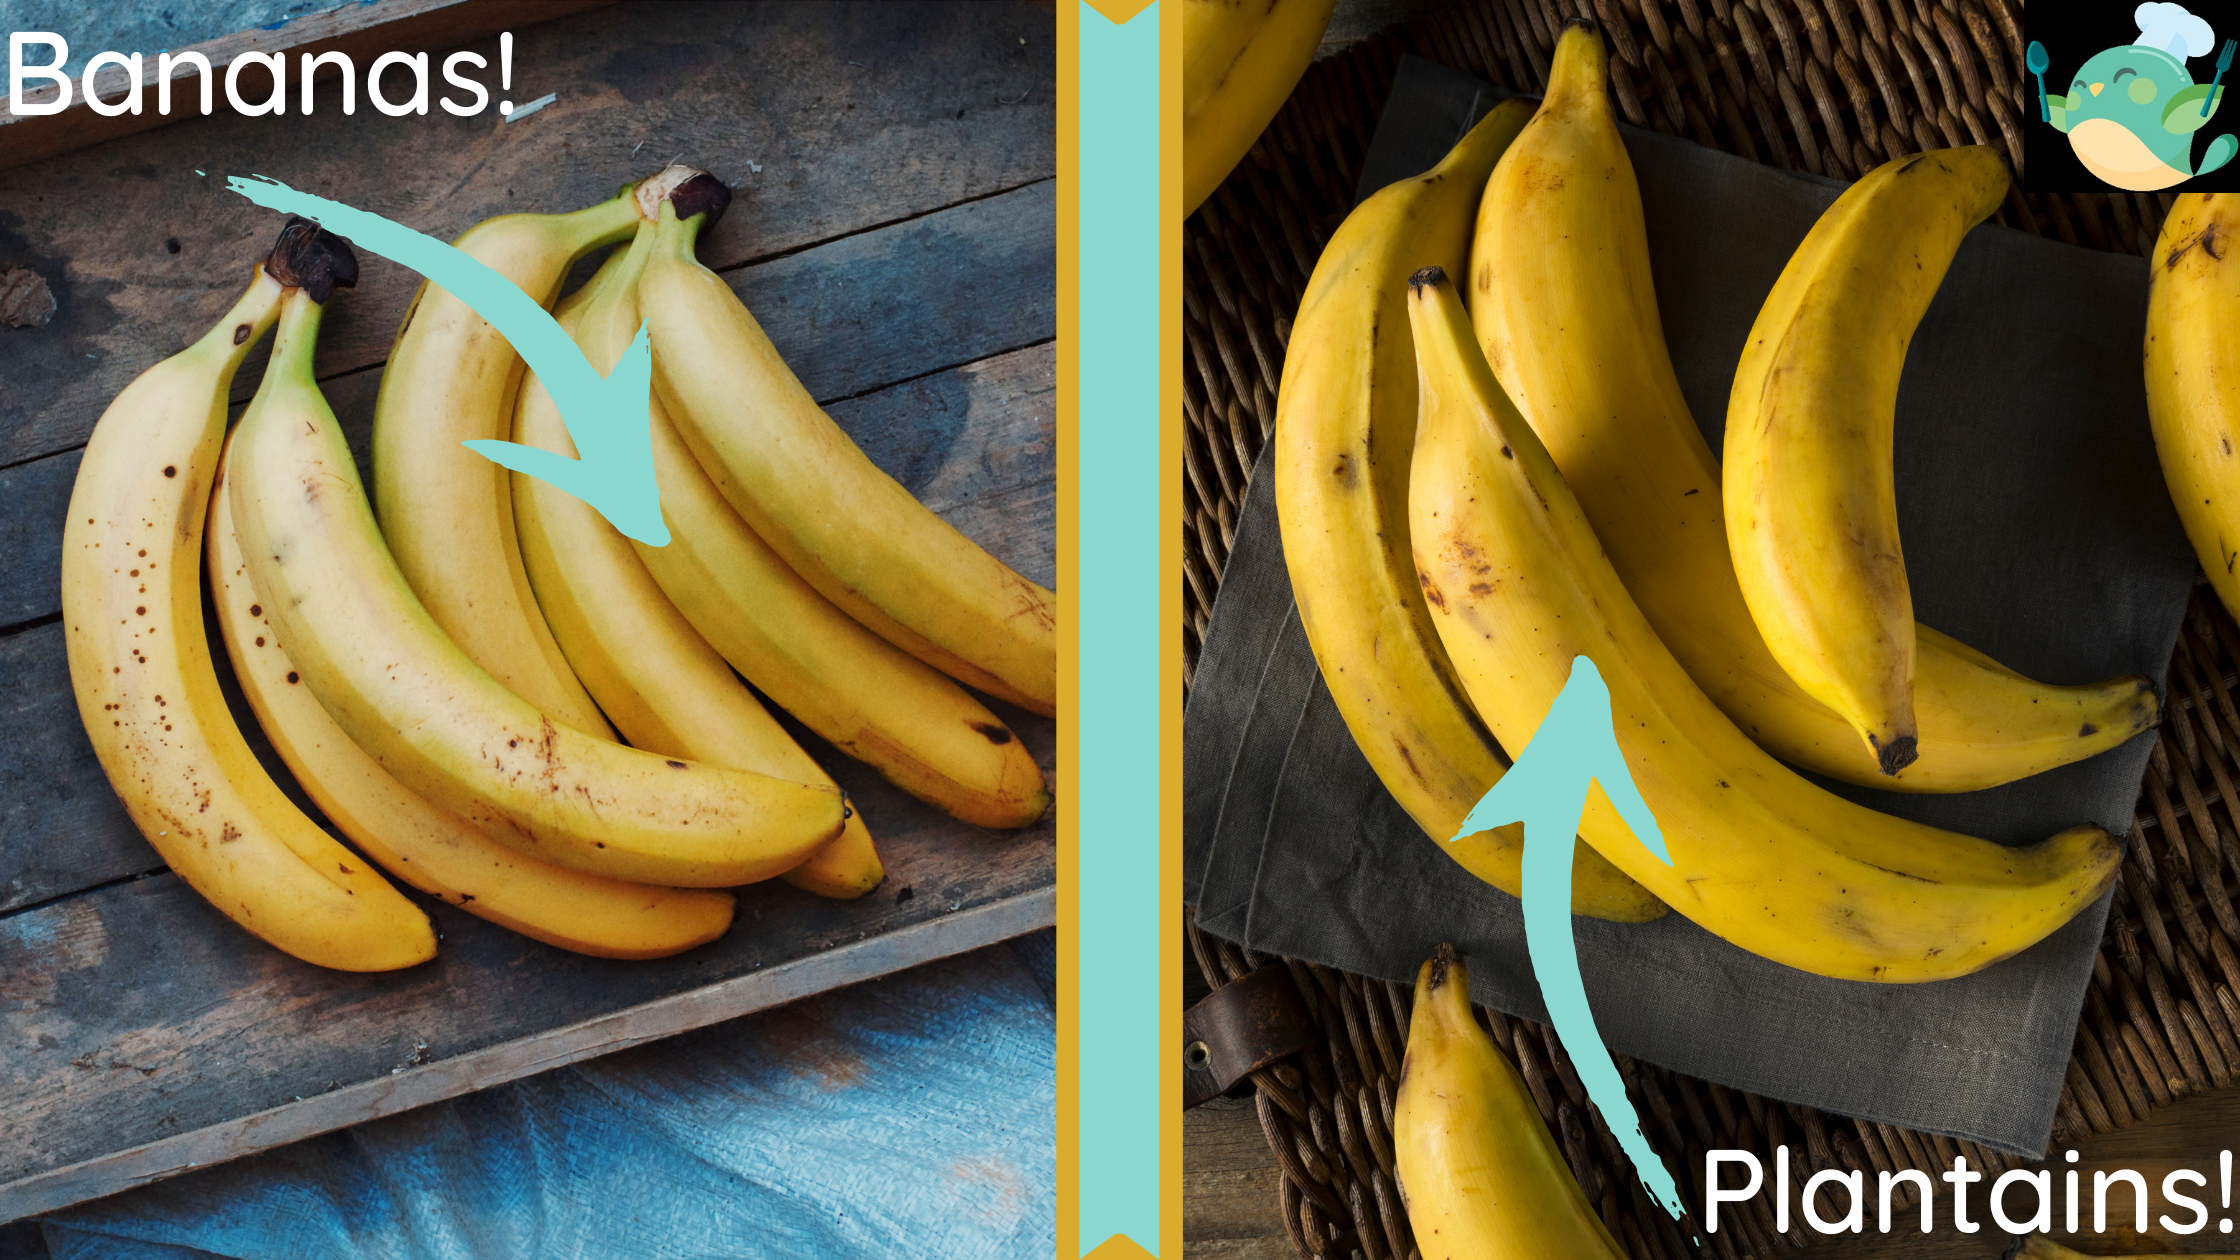 bananas and plantains with eat2explore logo